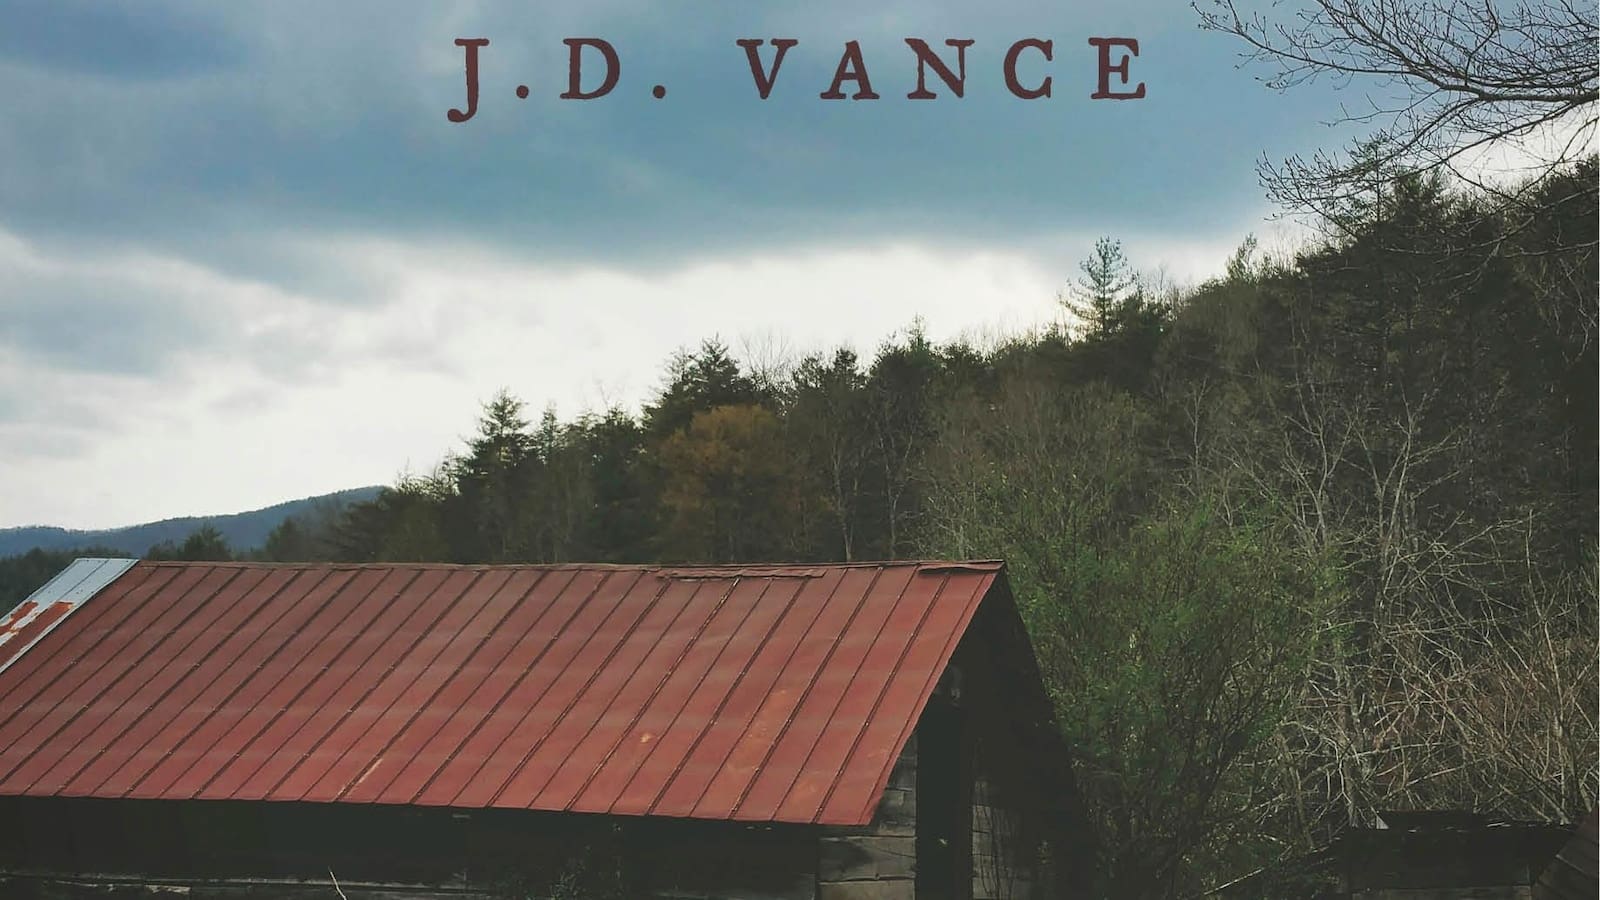 Publisher plans massive ‘Hillbilly Elegy’ reprints to meet demand for VP candidate JD Vance’s book